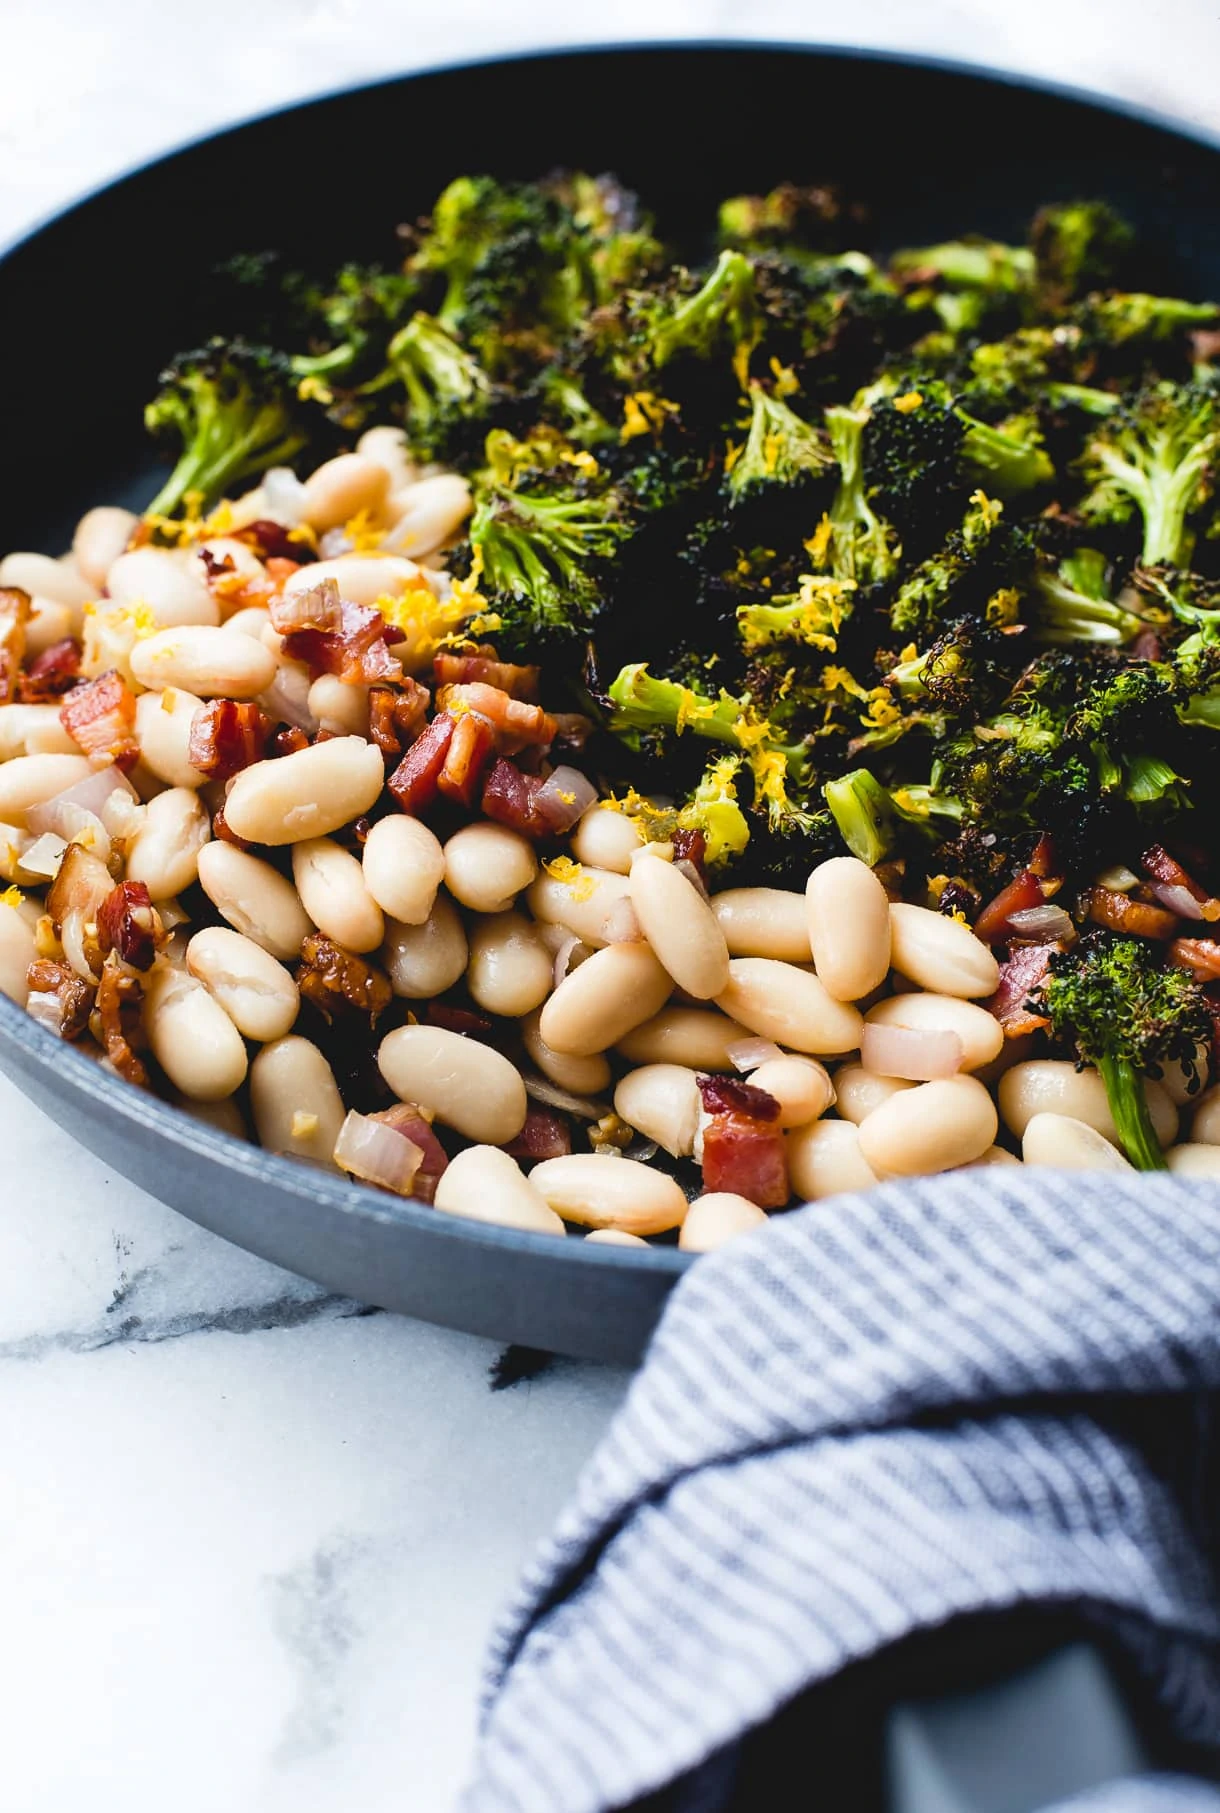 Great Northern Beans Recipe with Lemon Roasted Broccoli and Bacon